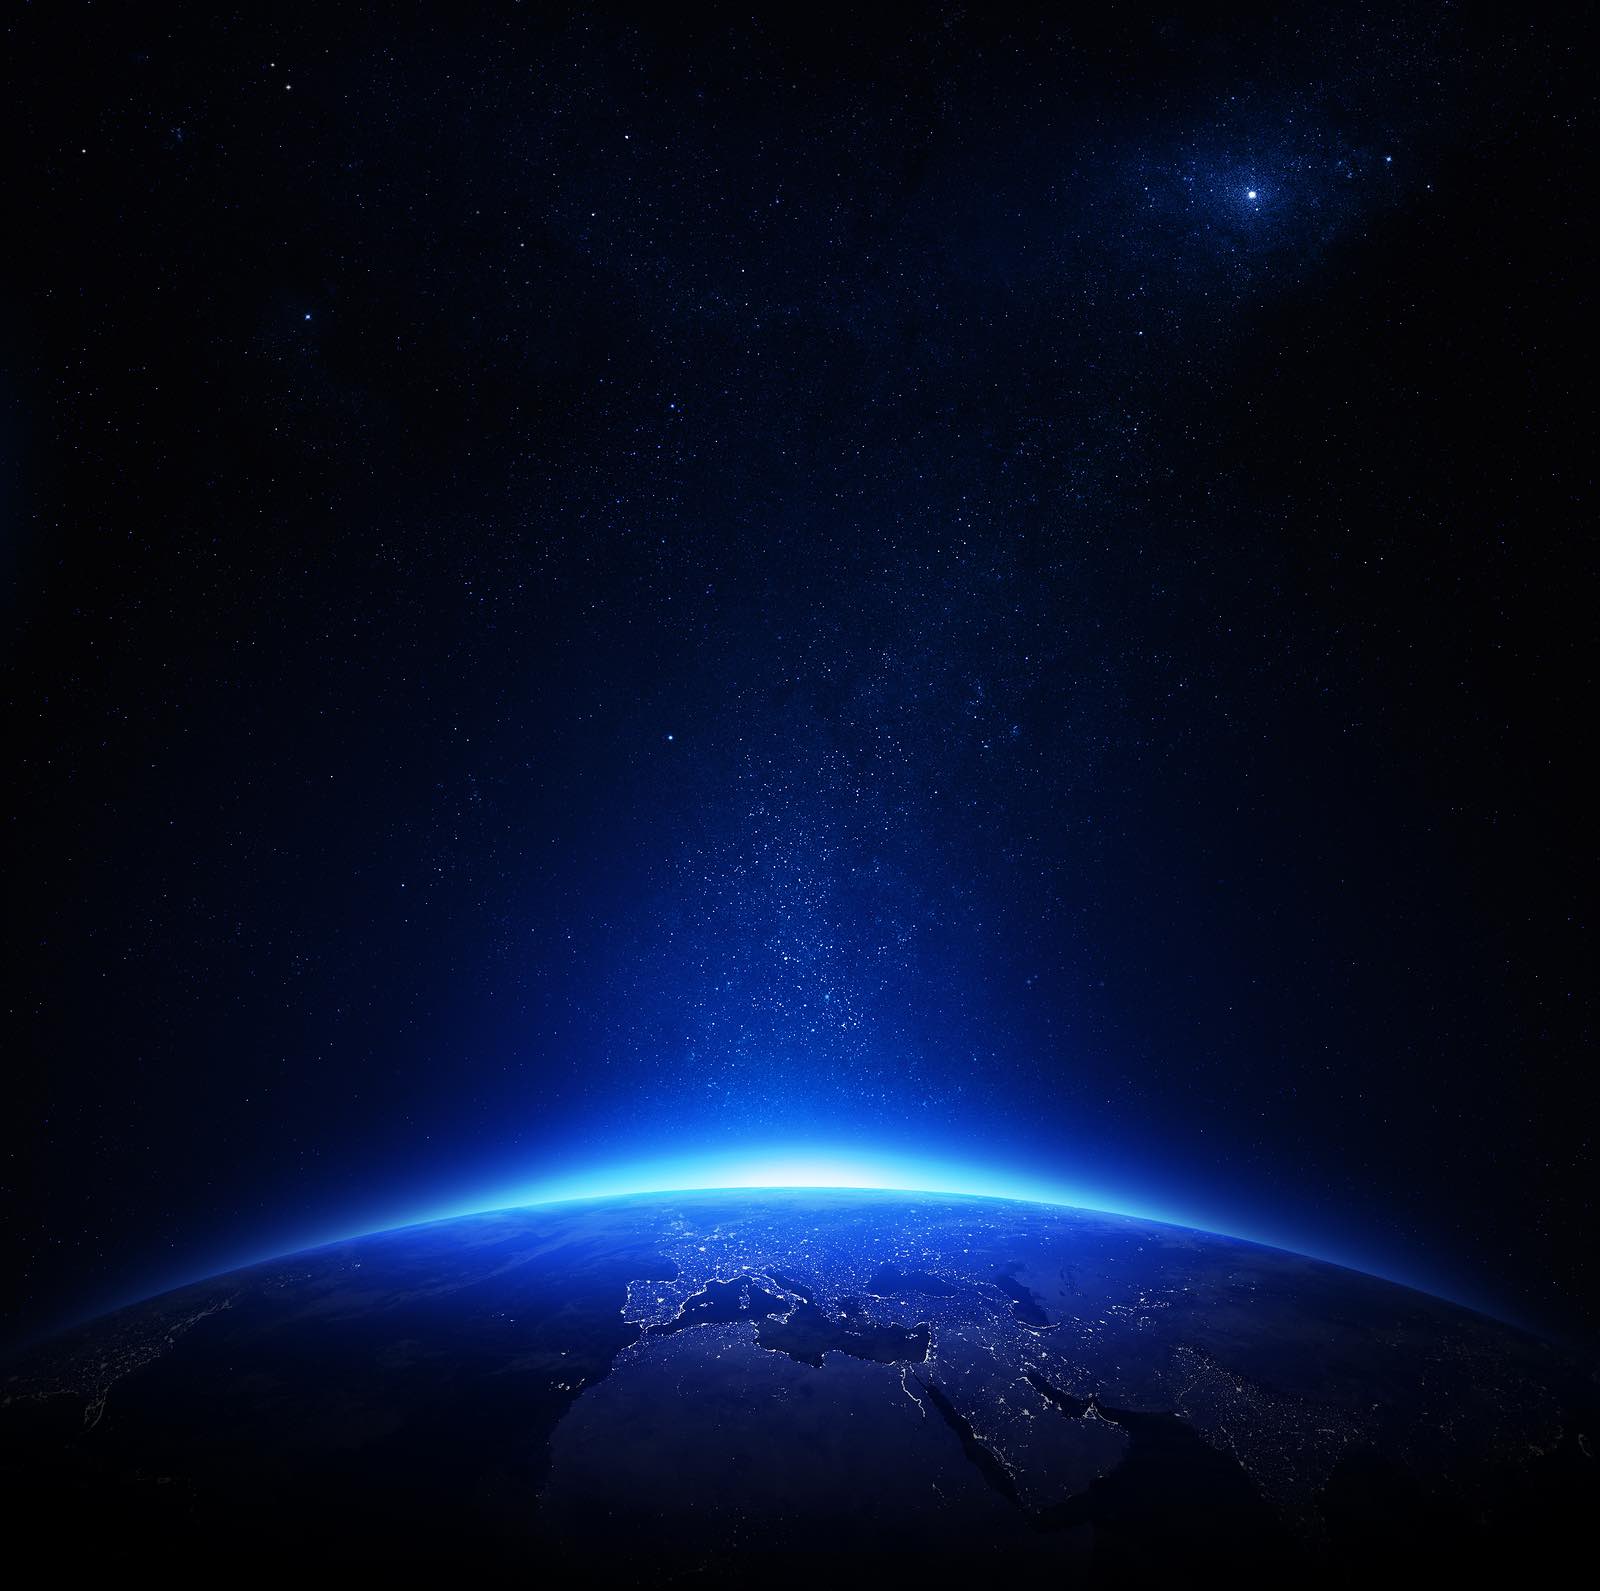 Earth at night with city lights (Elements of this image furnished by NASA)